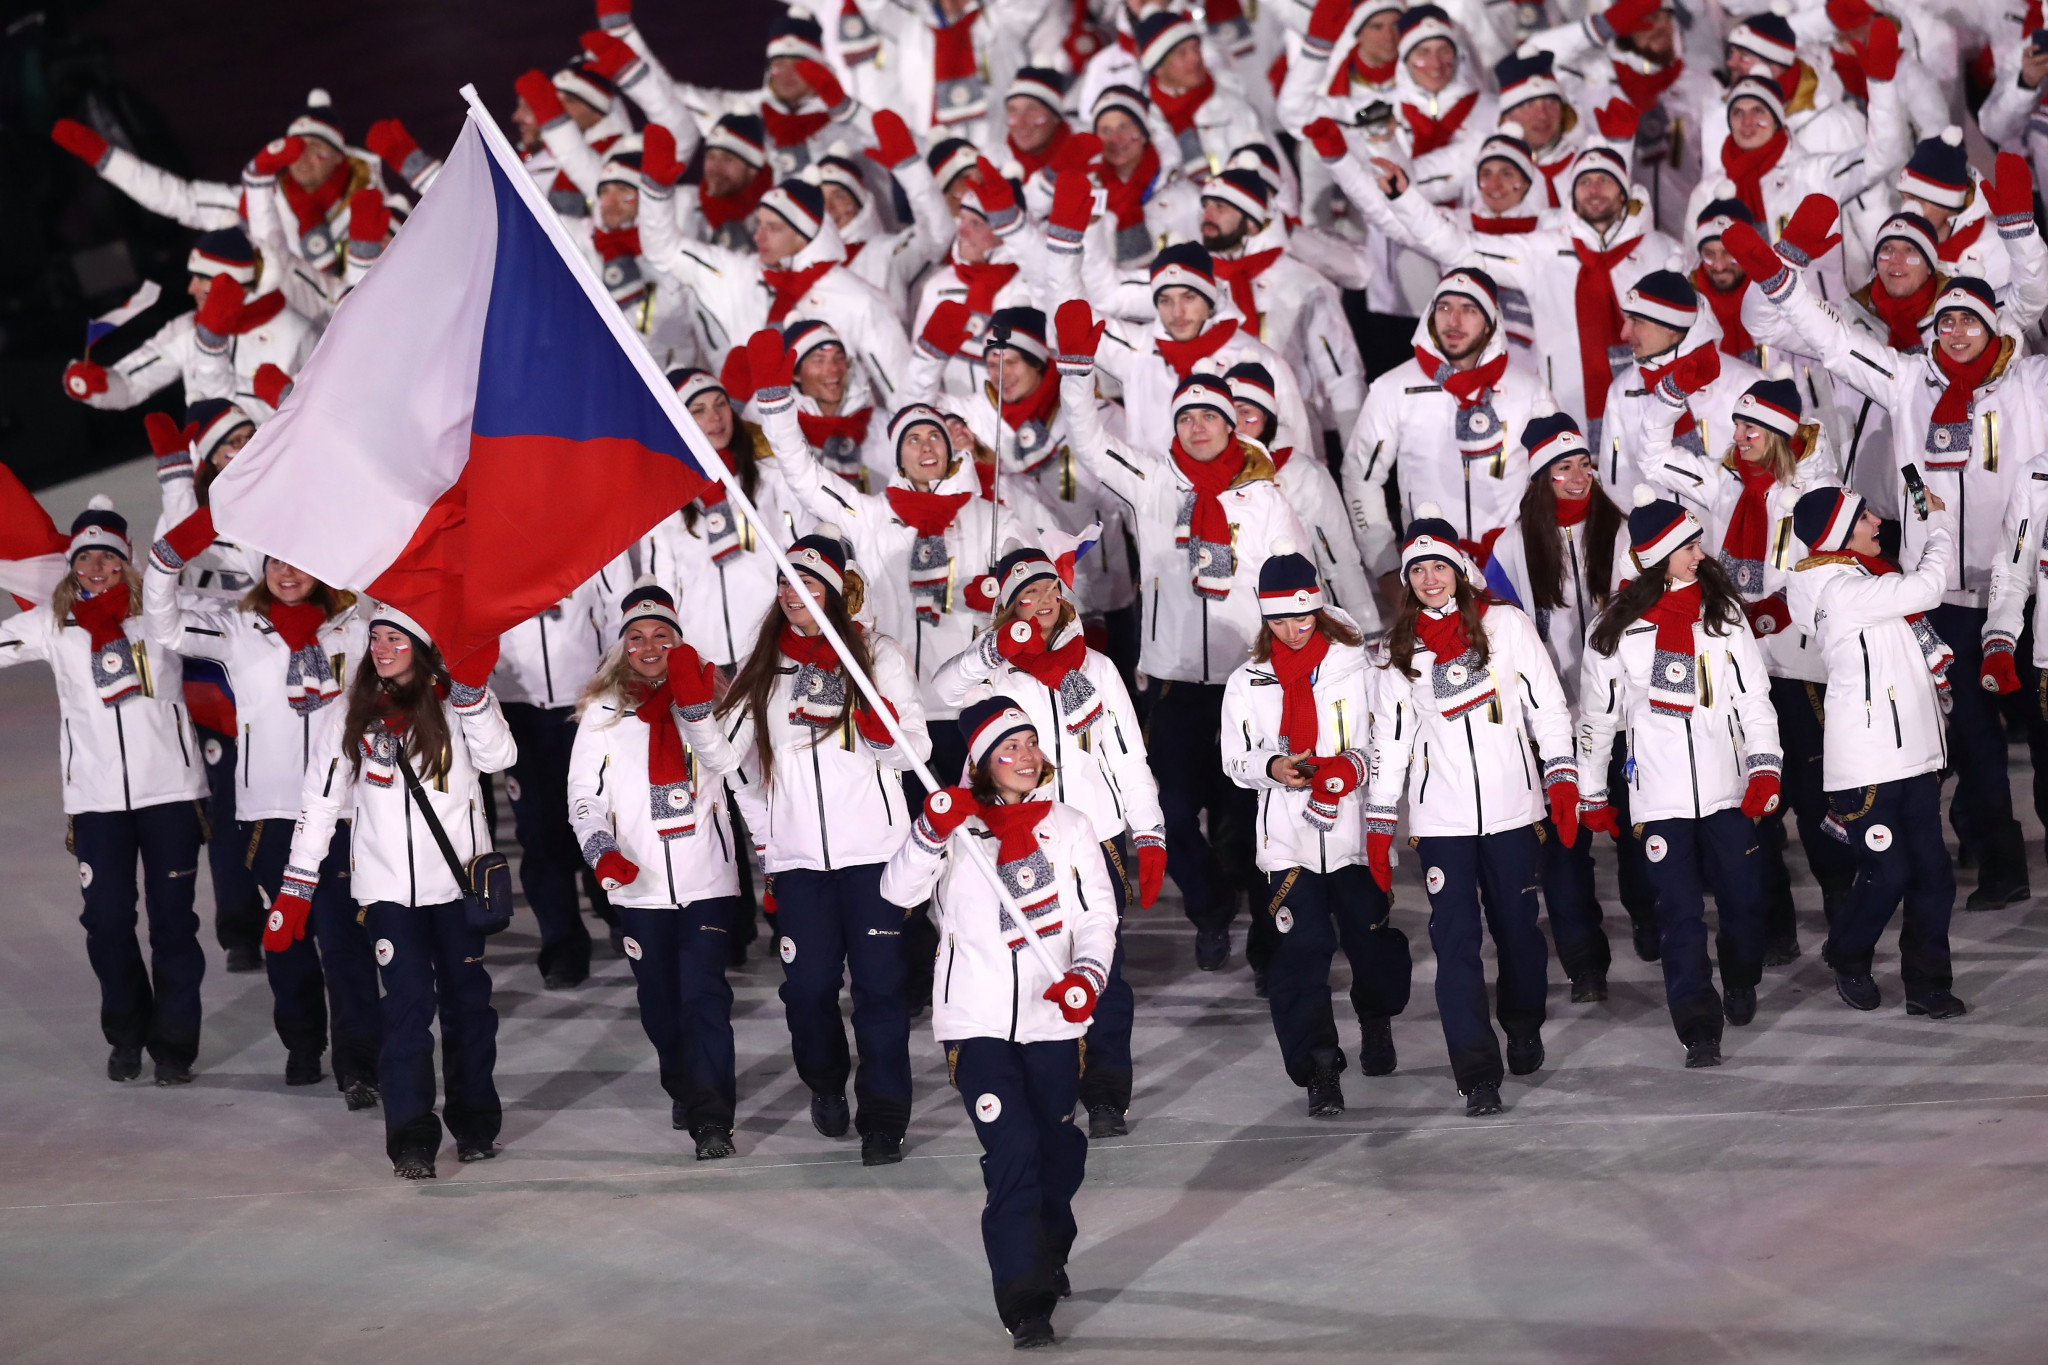 A total of 113 athletes are set to represent the Czech Republic at the Beijing 2022 Winter Olympics ©Getty Images